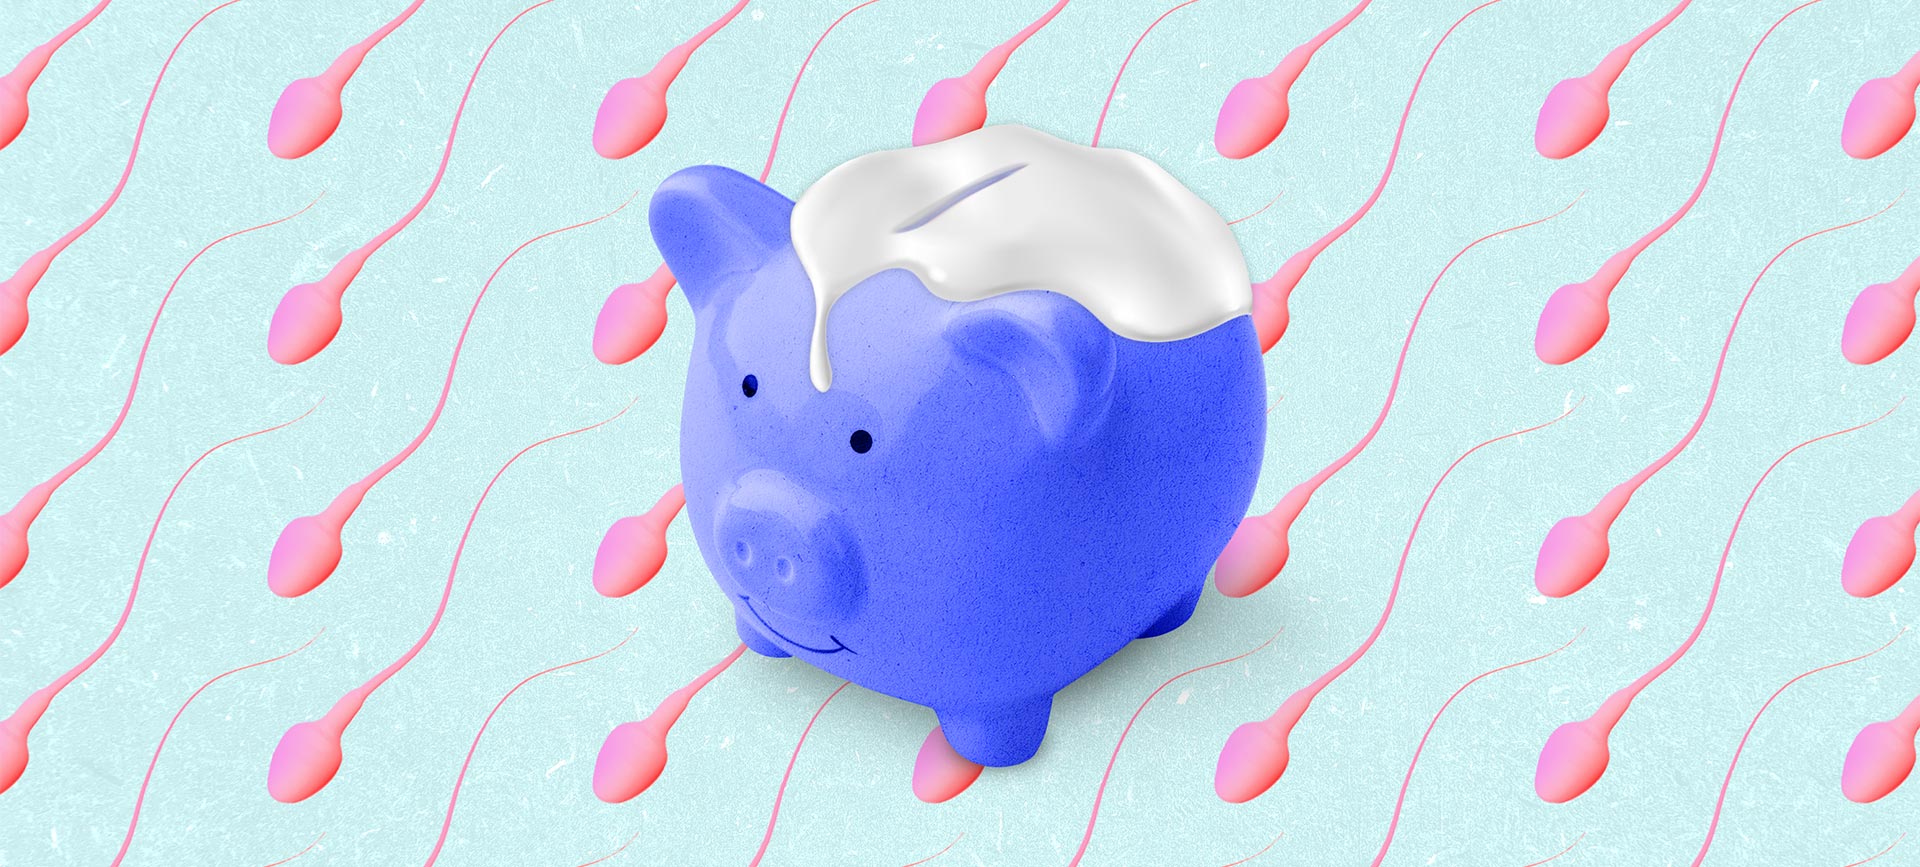 blue piggy bank covered in white liquid on a pink and blue background of sperm